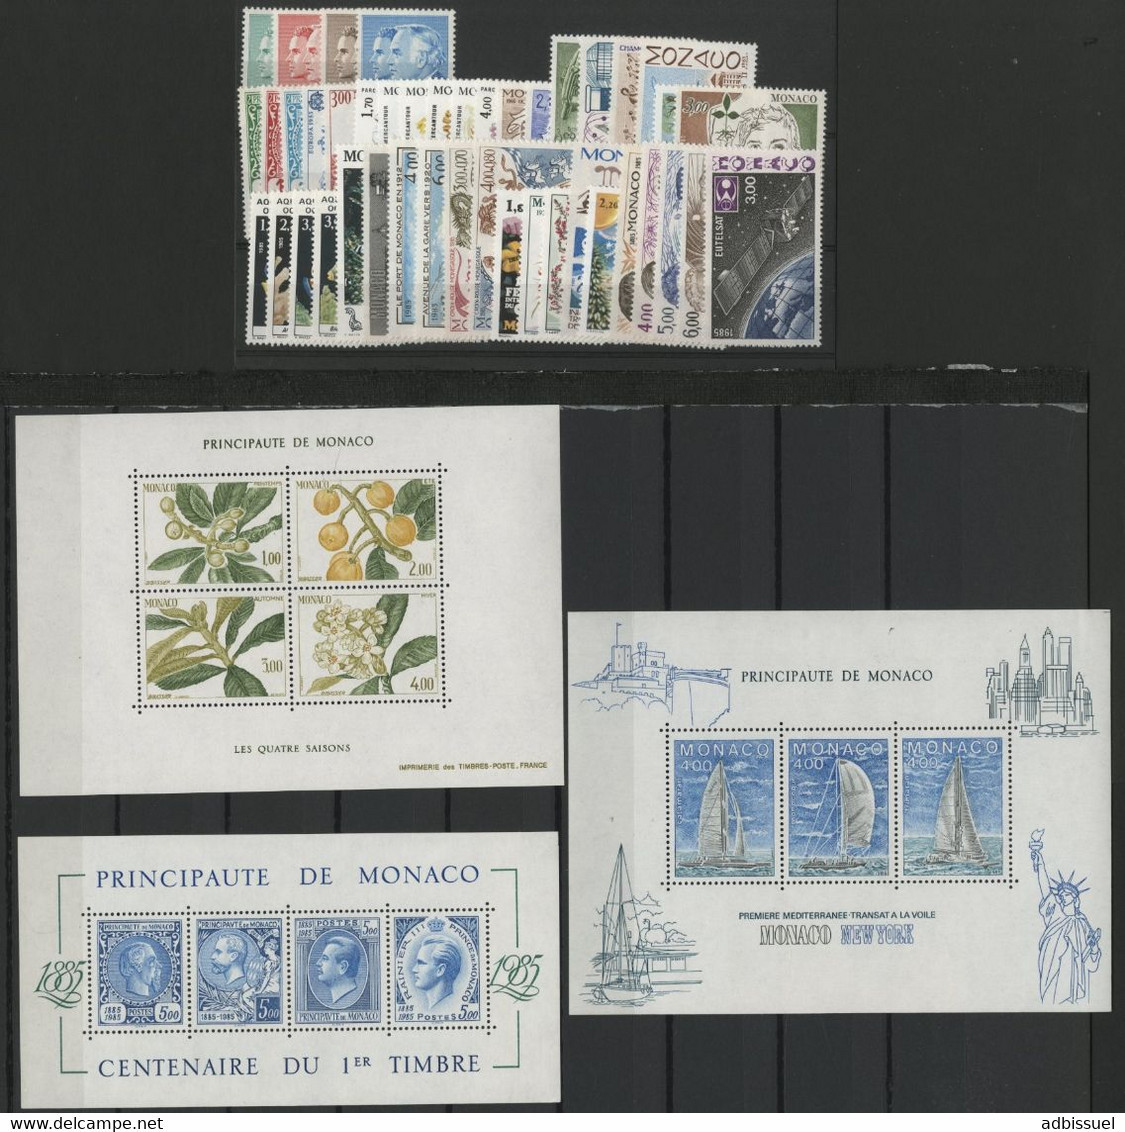 MONACO ANNEE COMPLETE 1985 COTE 119 € NEUFS ** (MNH) N° 1456 à 1509 Soit 54 Timbres. TB - Años Completos